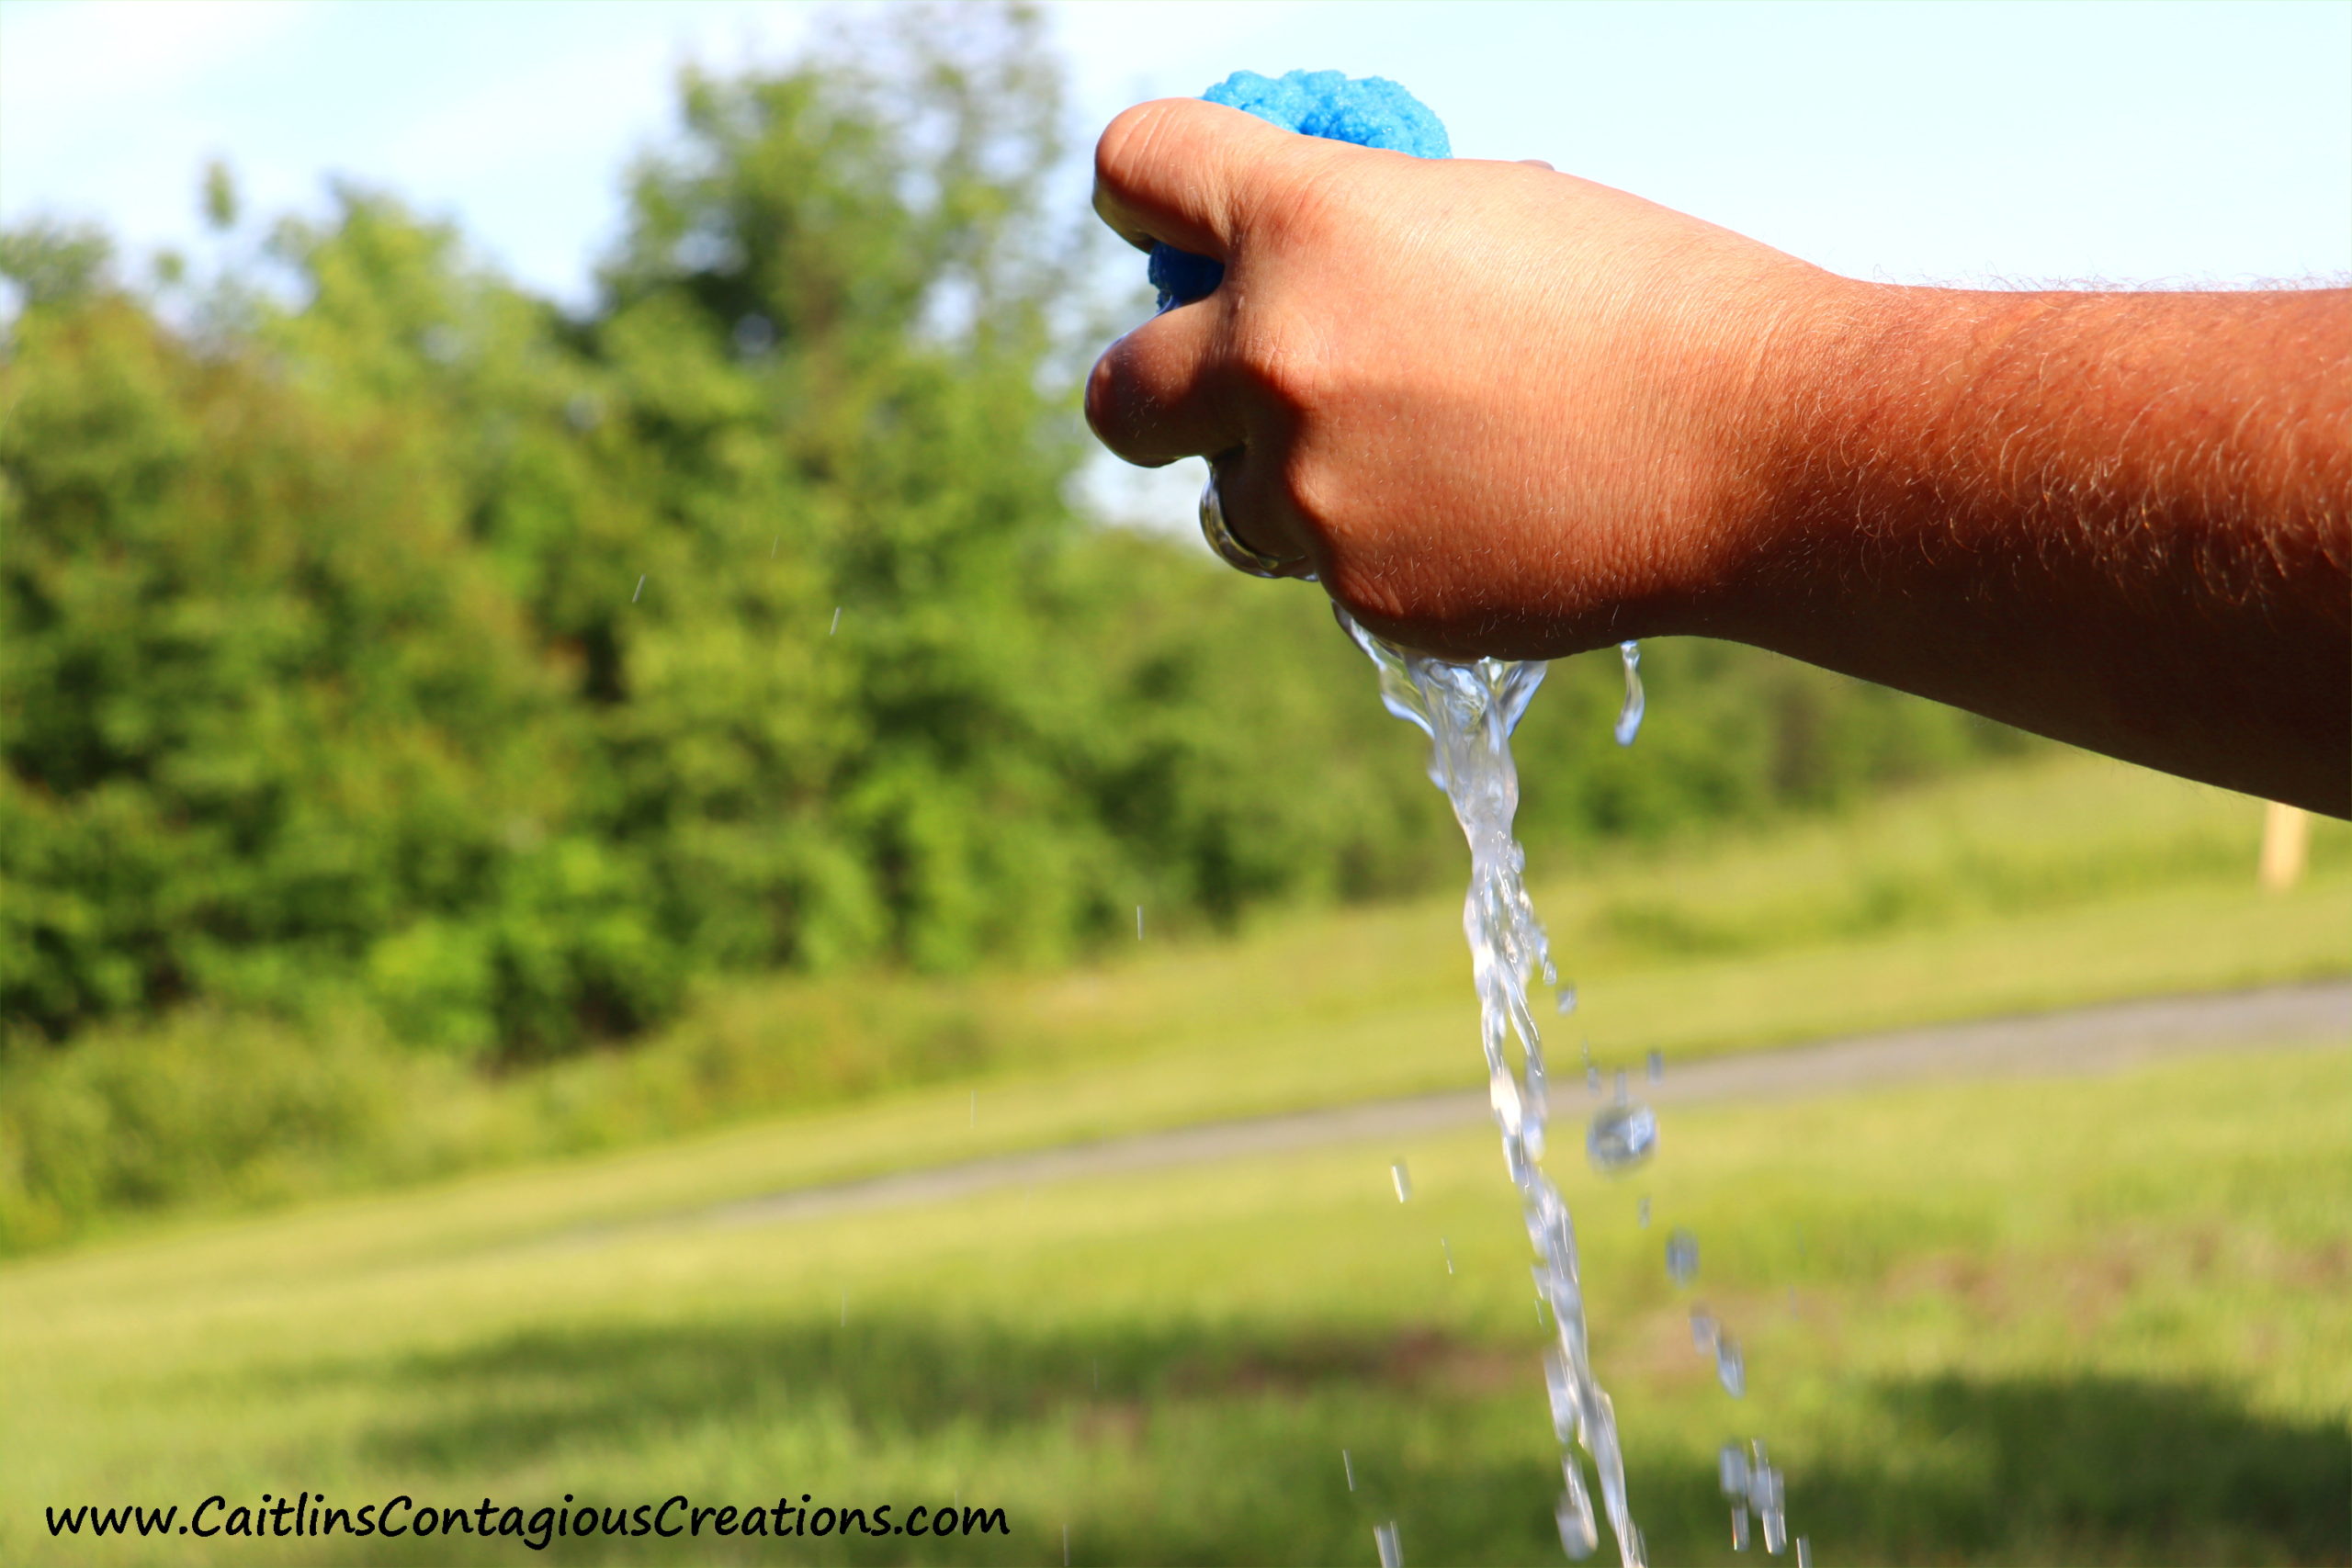 reusable water balloons hold a lot of water